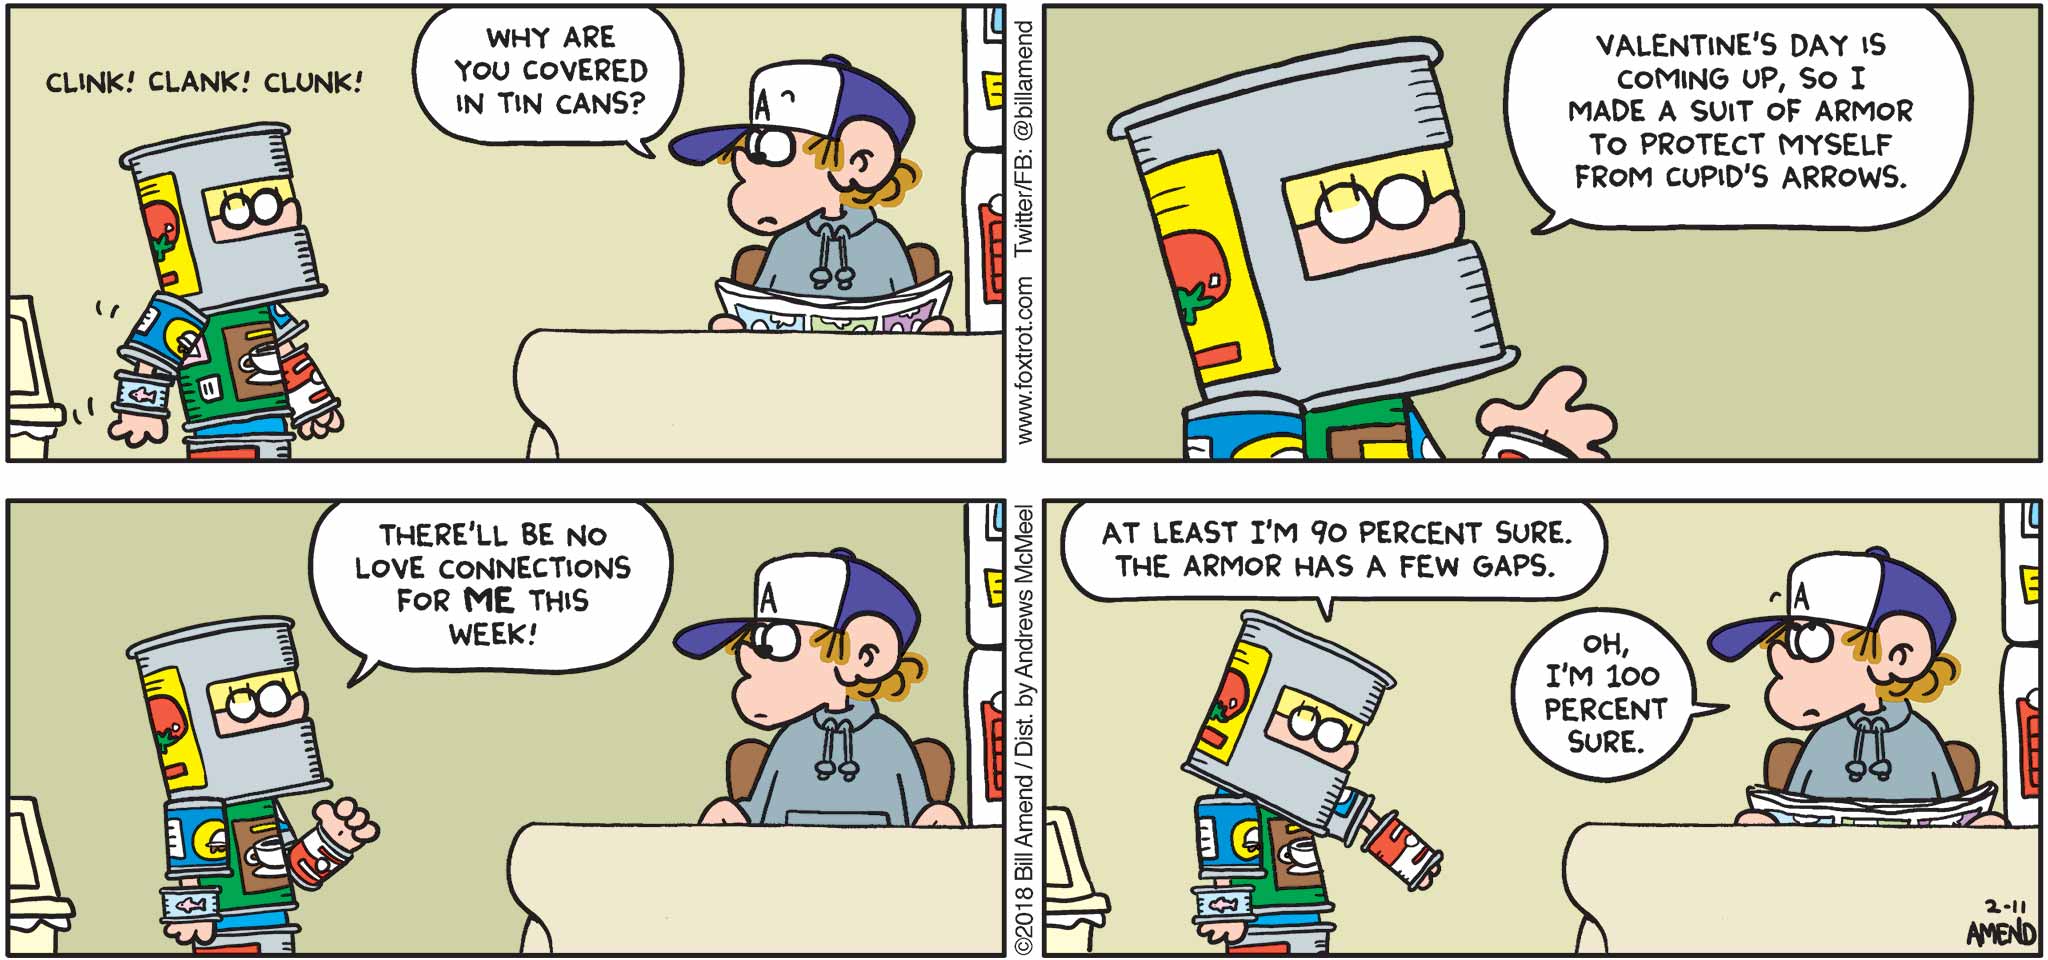 FoxTrot by Bill Amend - "Cupid Proof" published February 11, 2018 - Peter says: Why are you covered in tin cans? Jason says: Valentine's Day is coming up, so I made a suit of armor to protect myself from Cupid's Arrows. There'll be no love connections for me this week! At least I'm 90 percent sure. The armor has a few gaps. Peter says: Oh, I'm 100 percent sure.